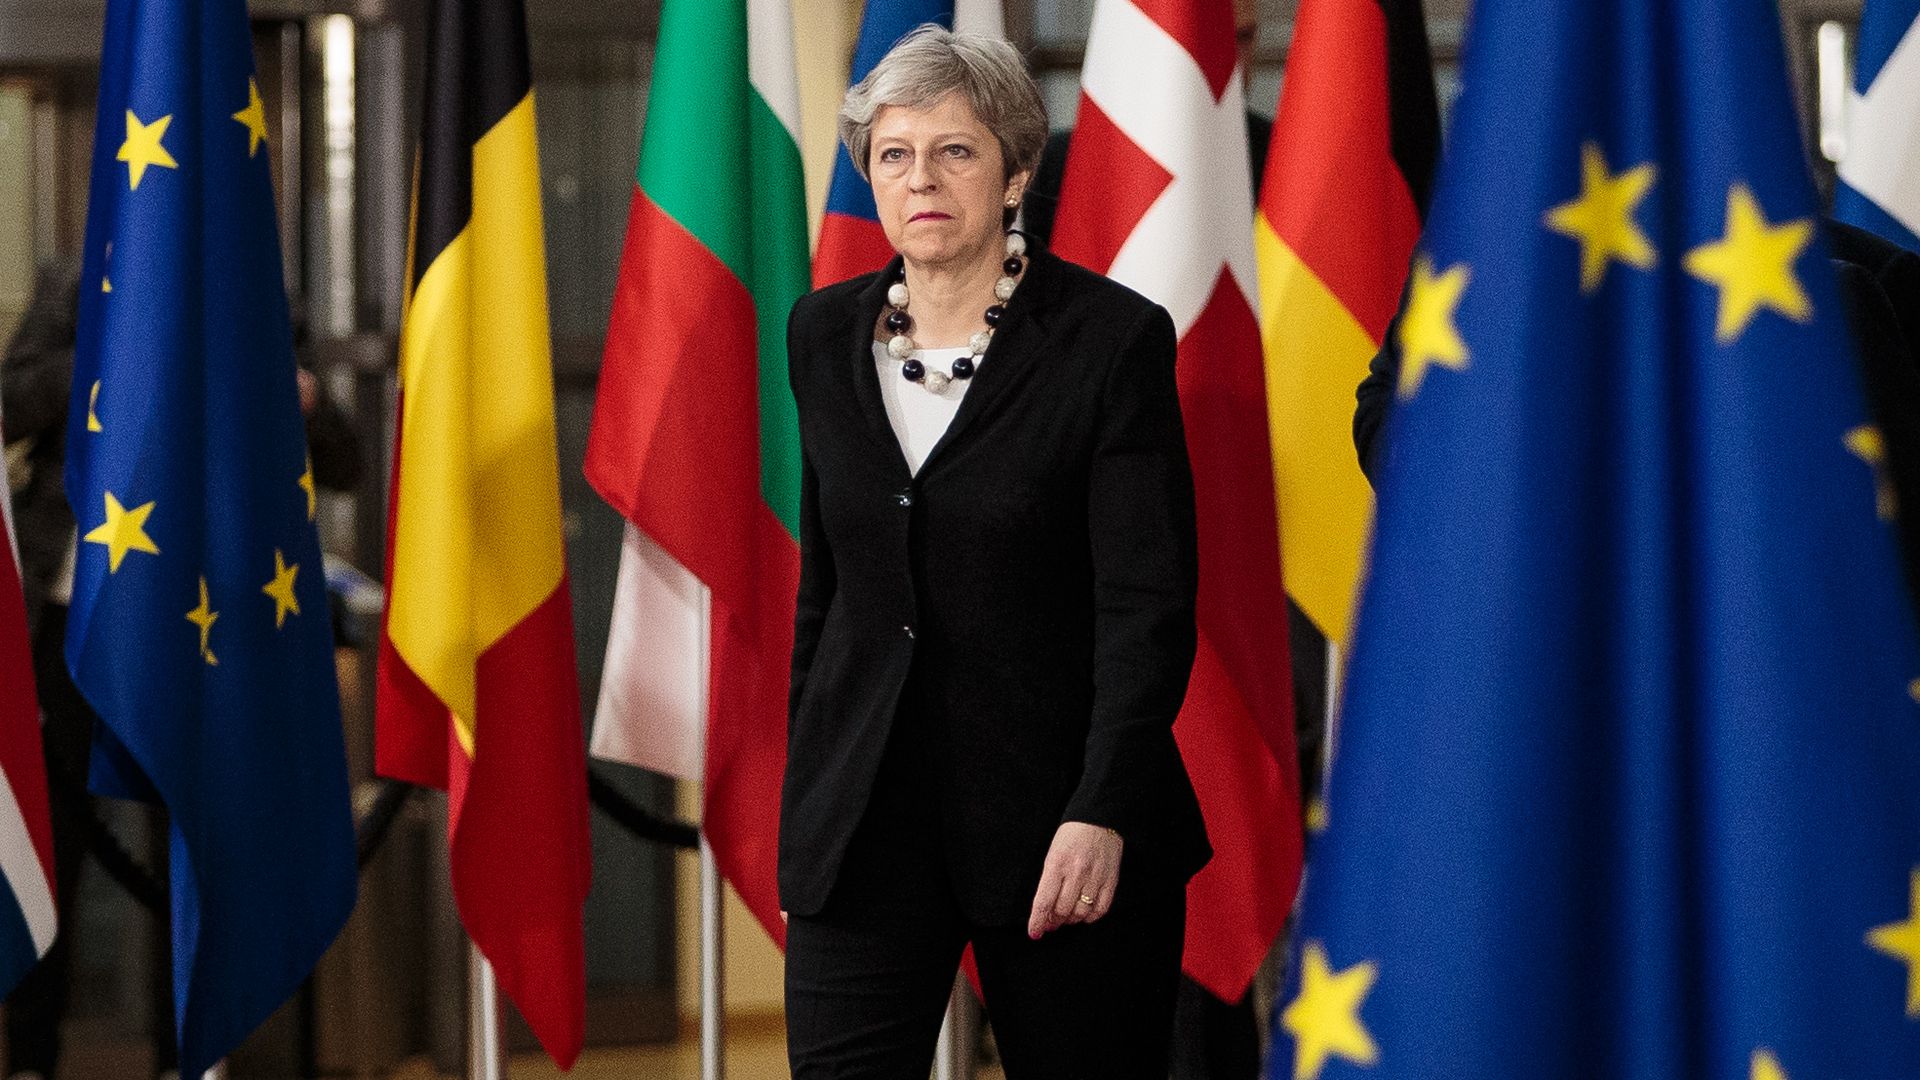 British Prime Minster Theresa May arrives at the Council of the European Union.